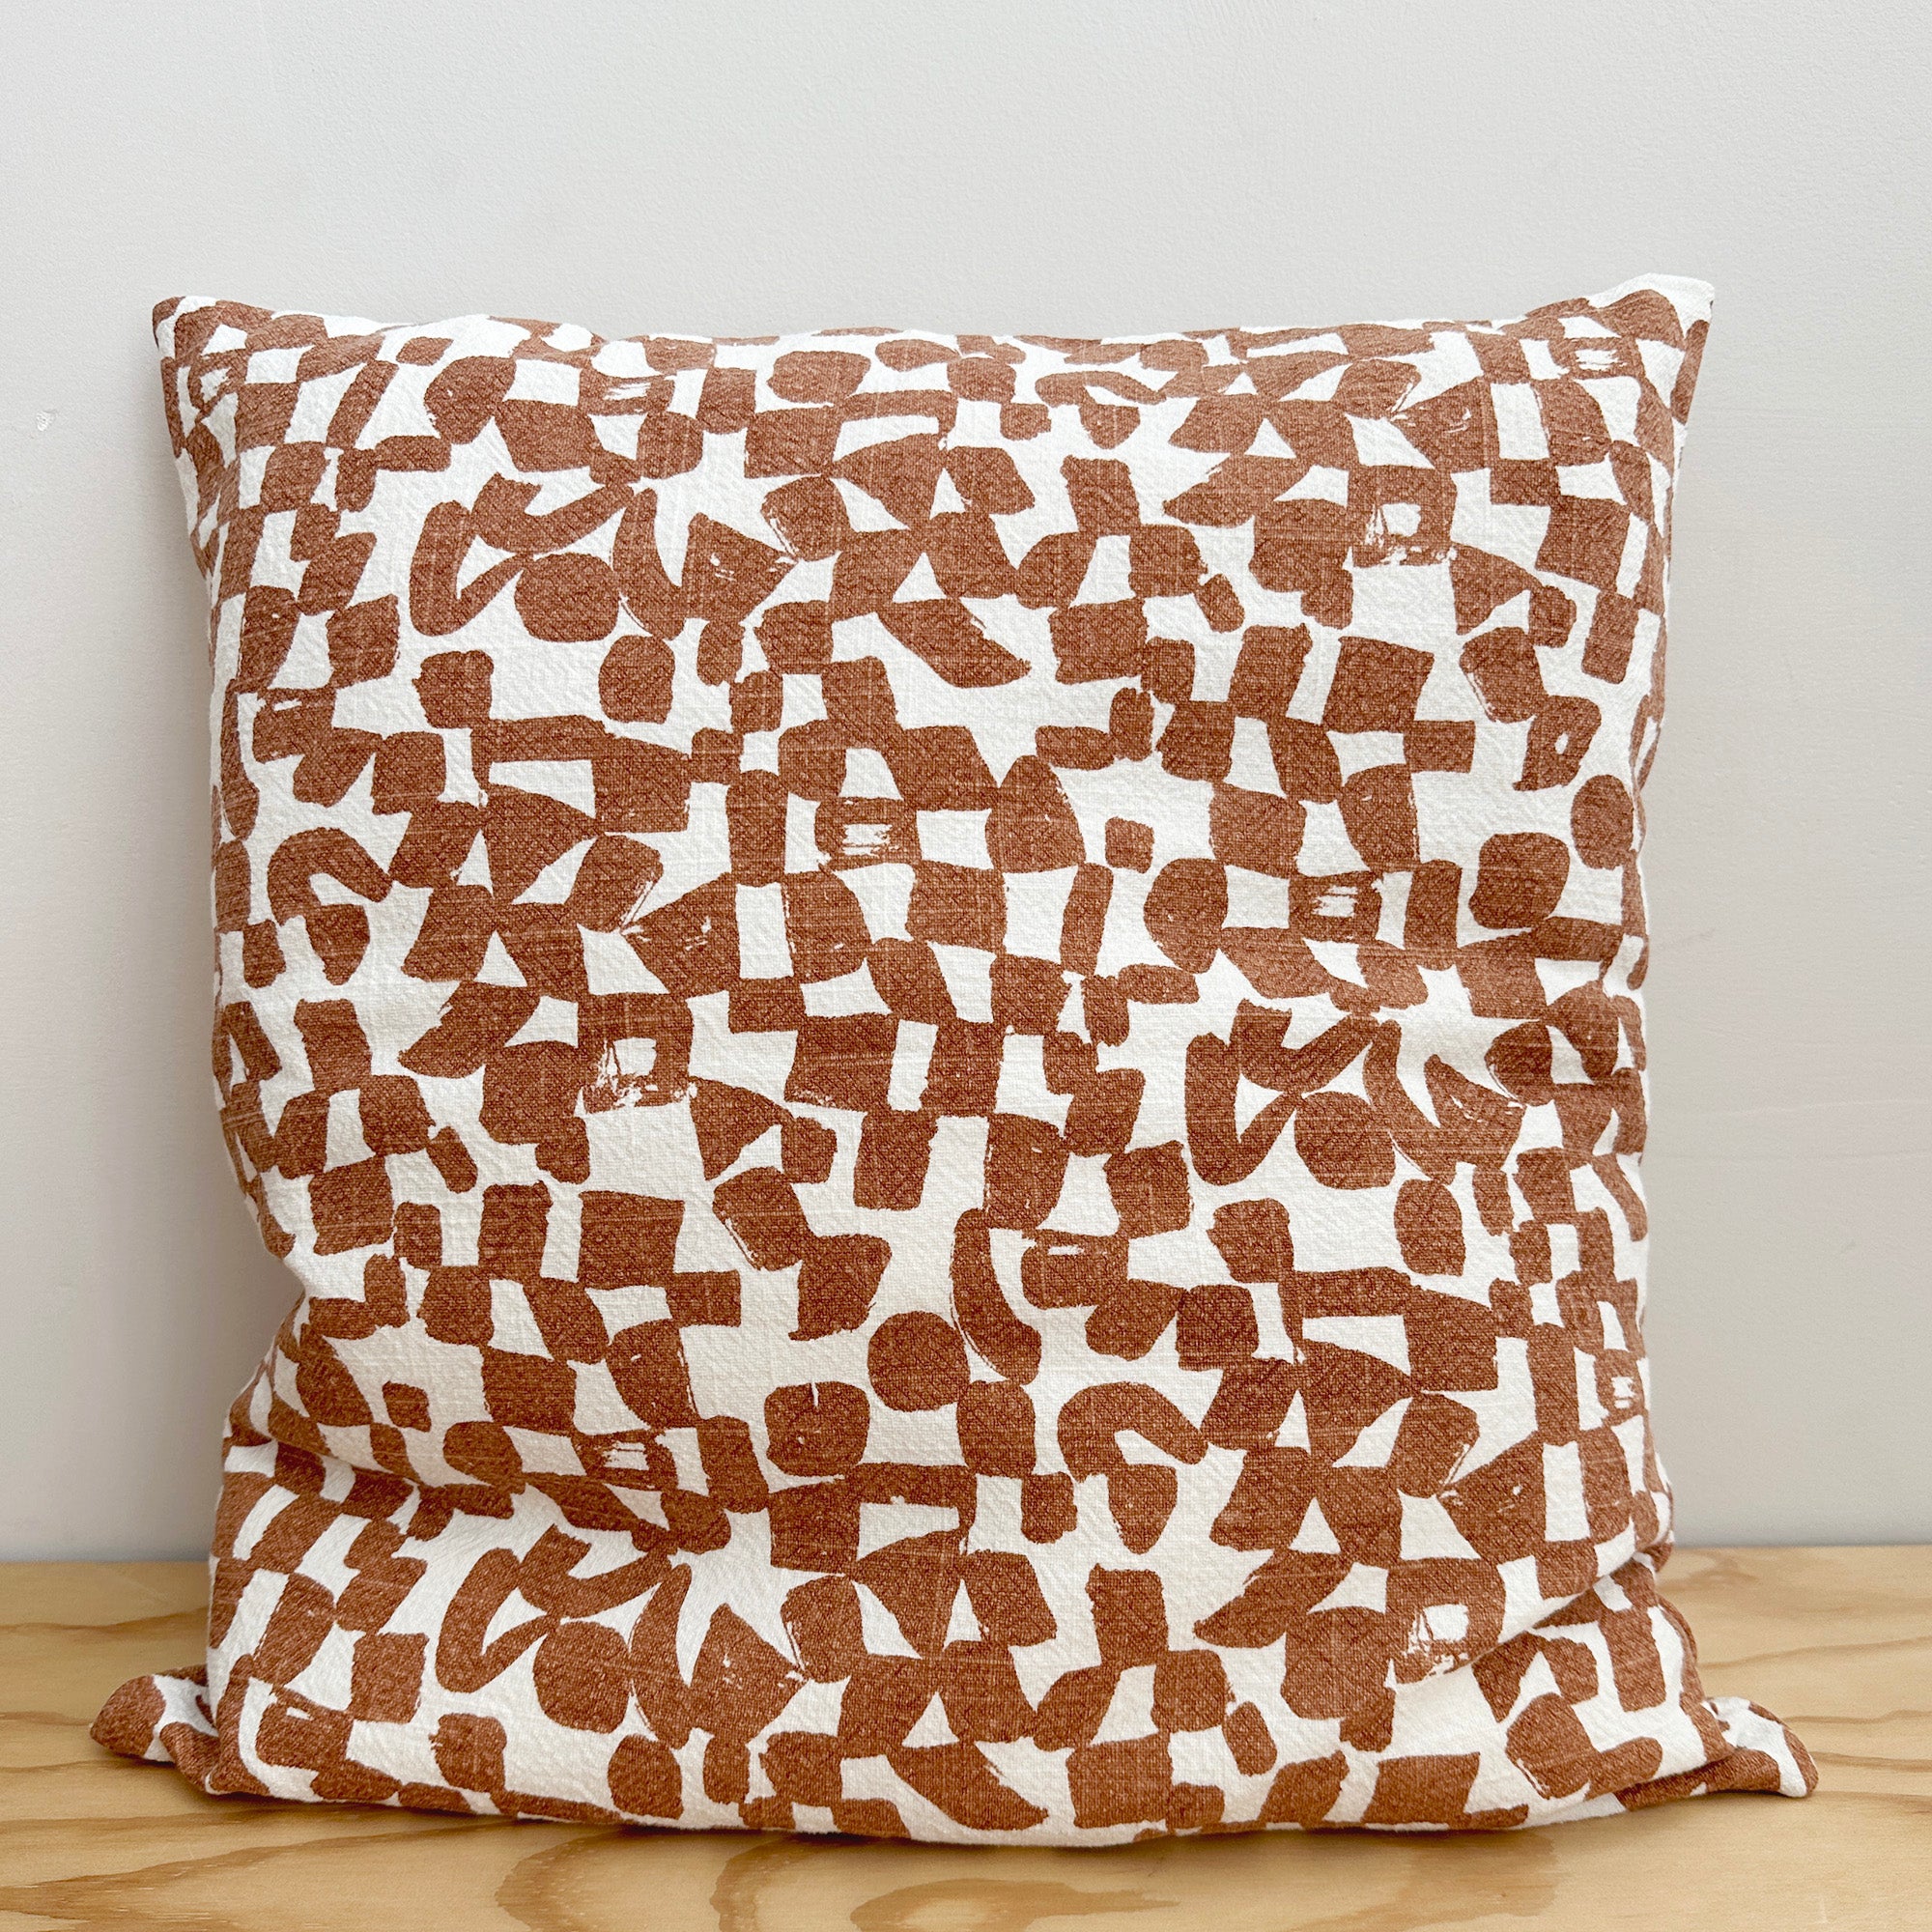 The Square Throw Pillow - Checks in Amber and Bare